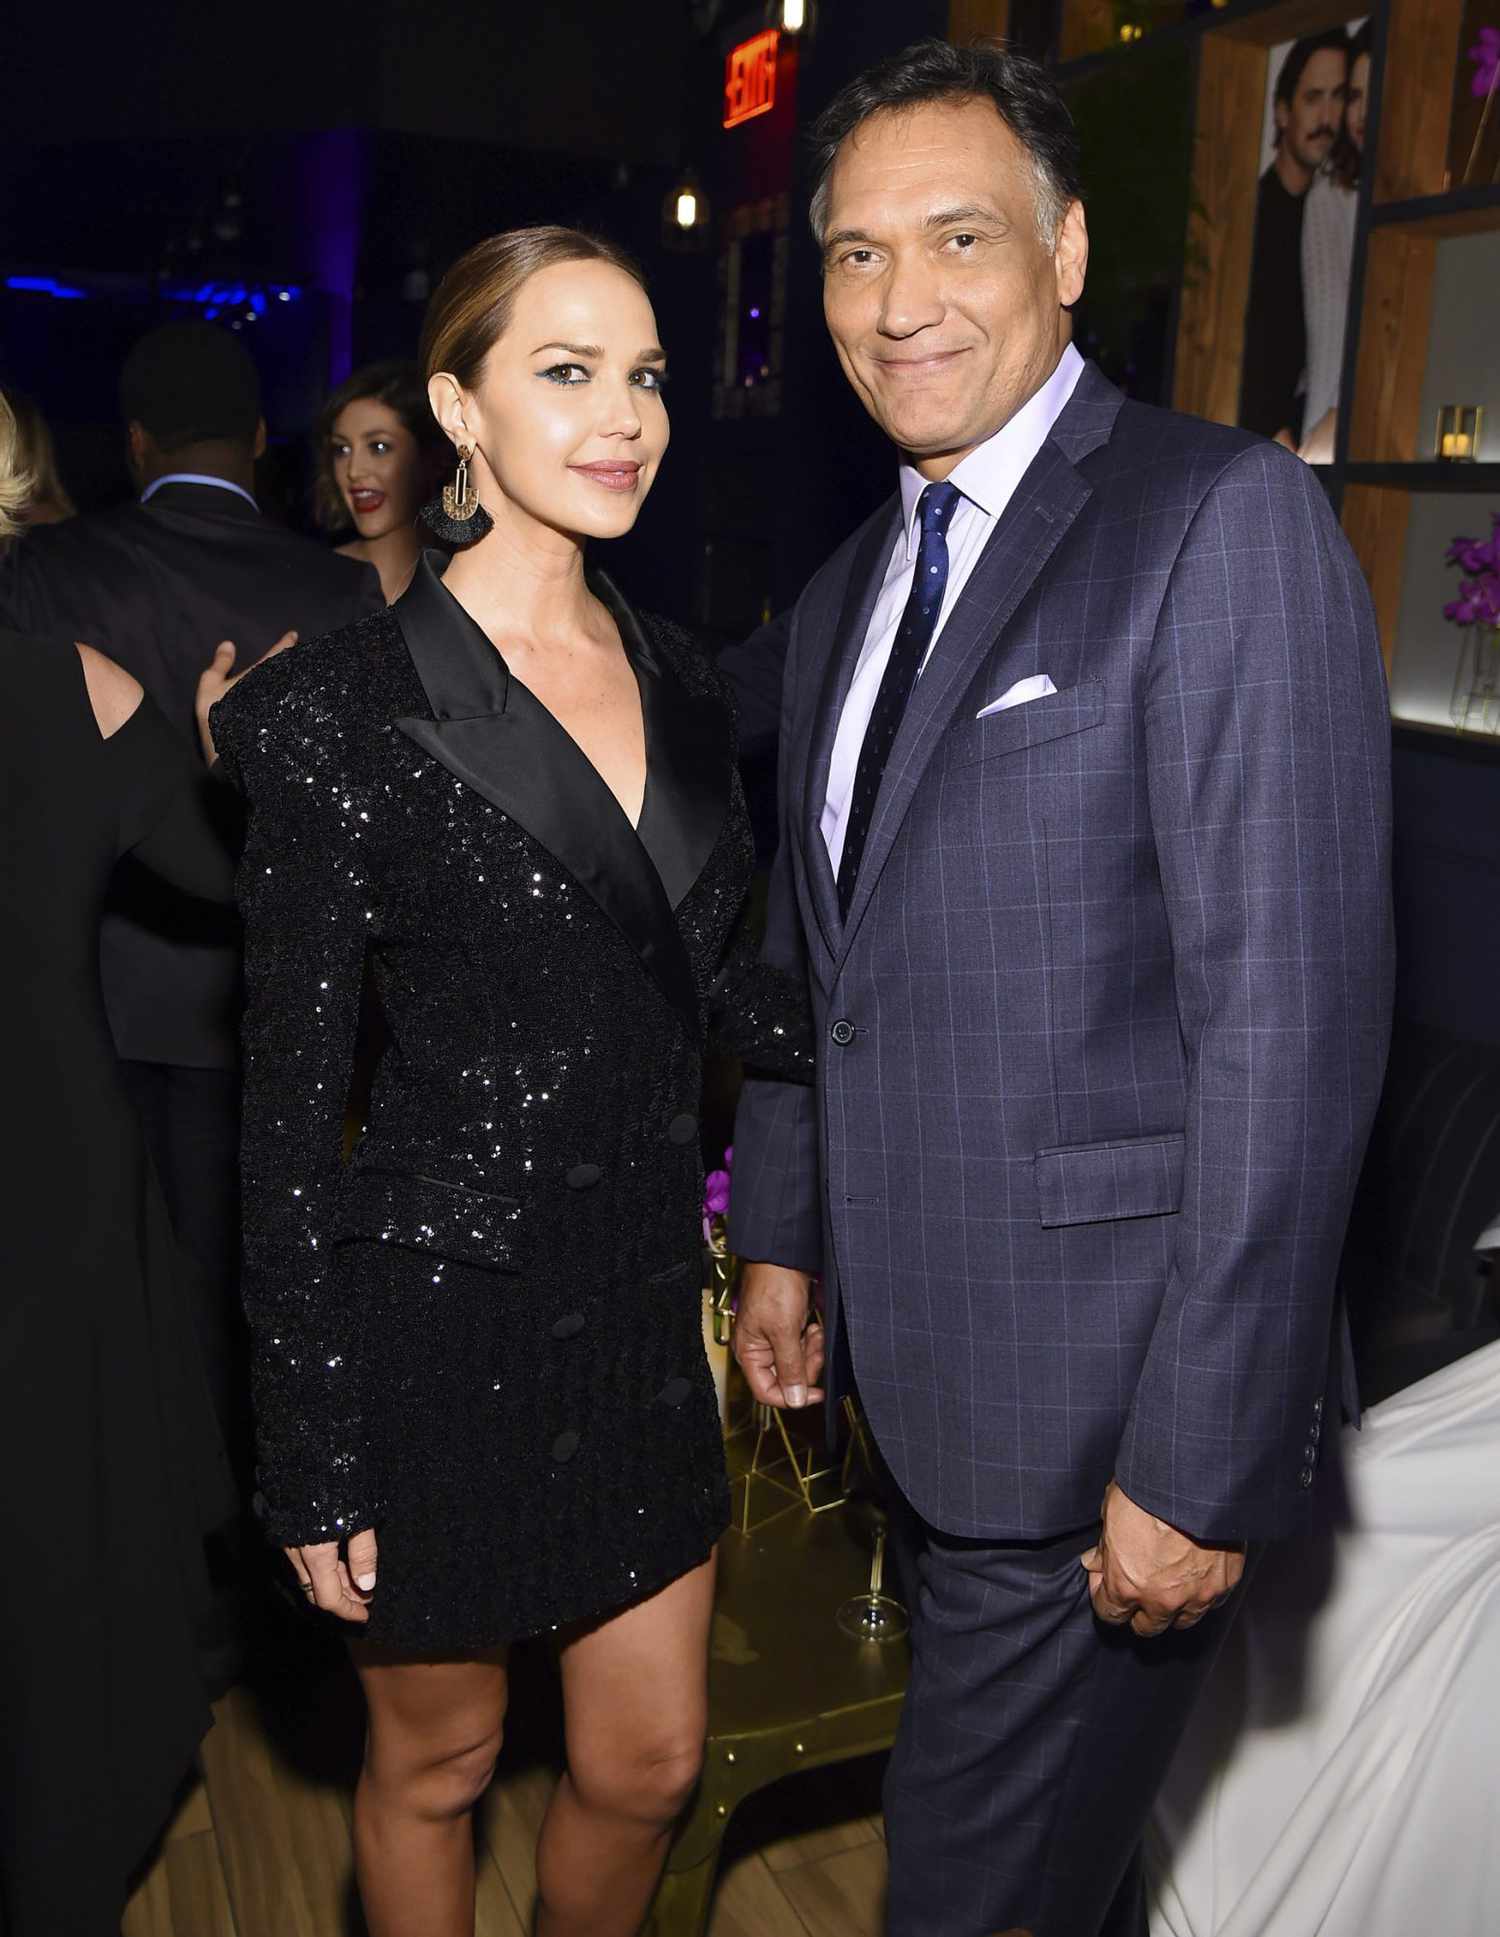 NEW YORK, NEW YORK - MAY 13: Arielle Kebbel and Jimmy Smits attend the Entertainment Weekly & PEOPLE New York Upfronts Party on May 13, 2019 in New York City. (Photo by Larry Busacca/Getty Images for Entertainment Weekly & PEOPLE)